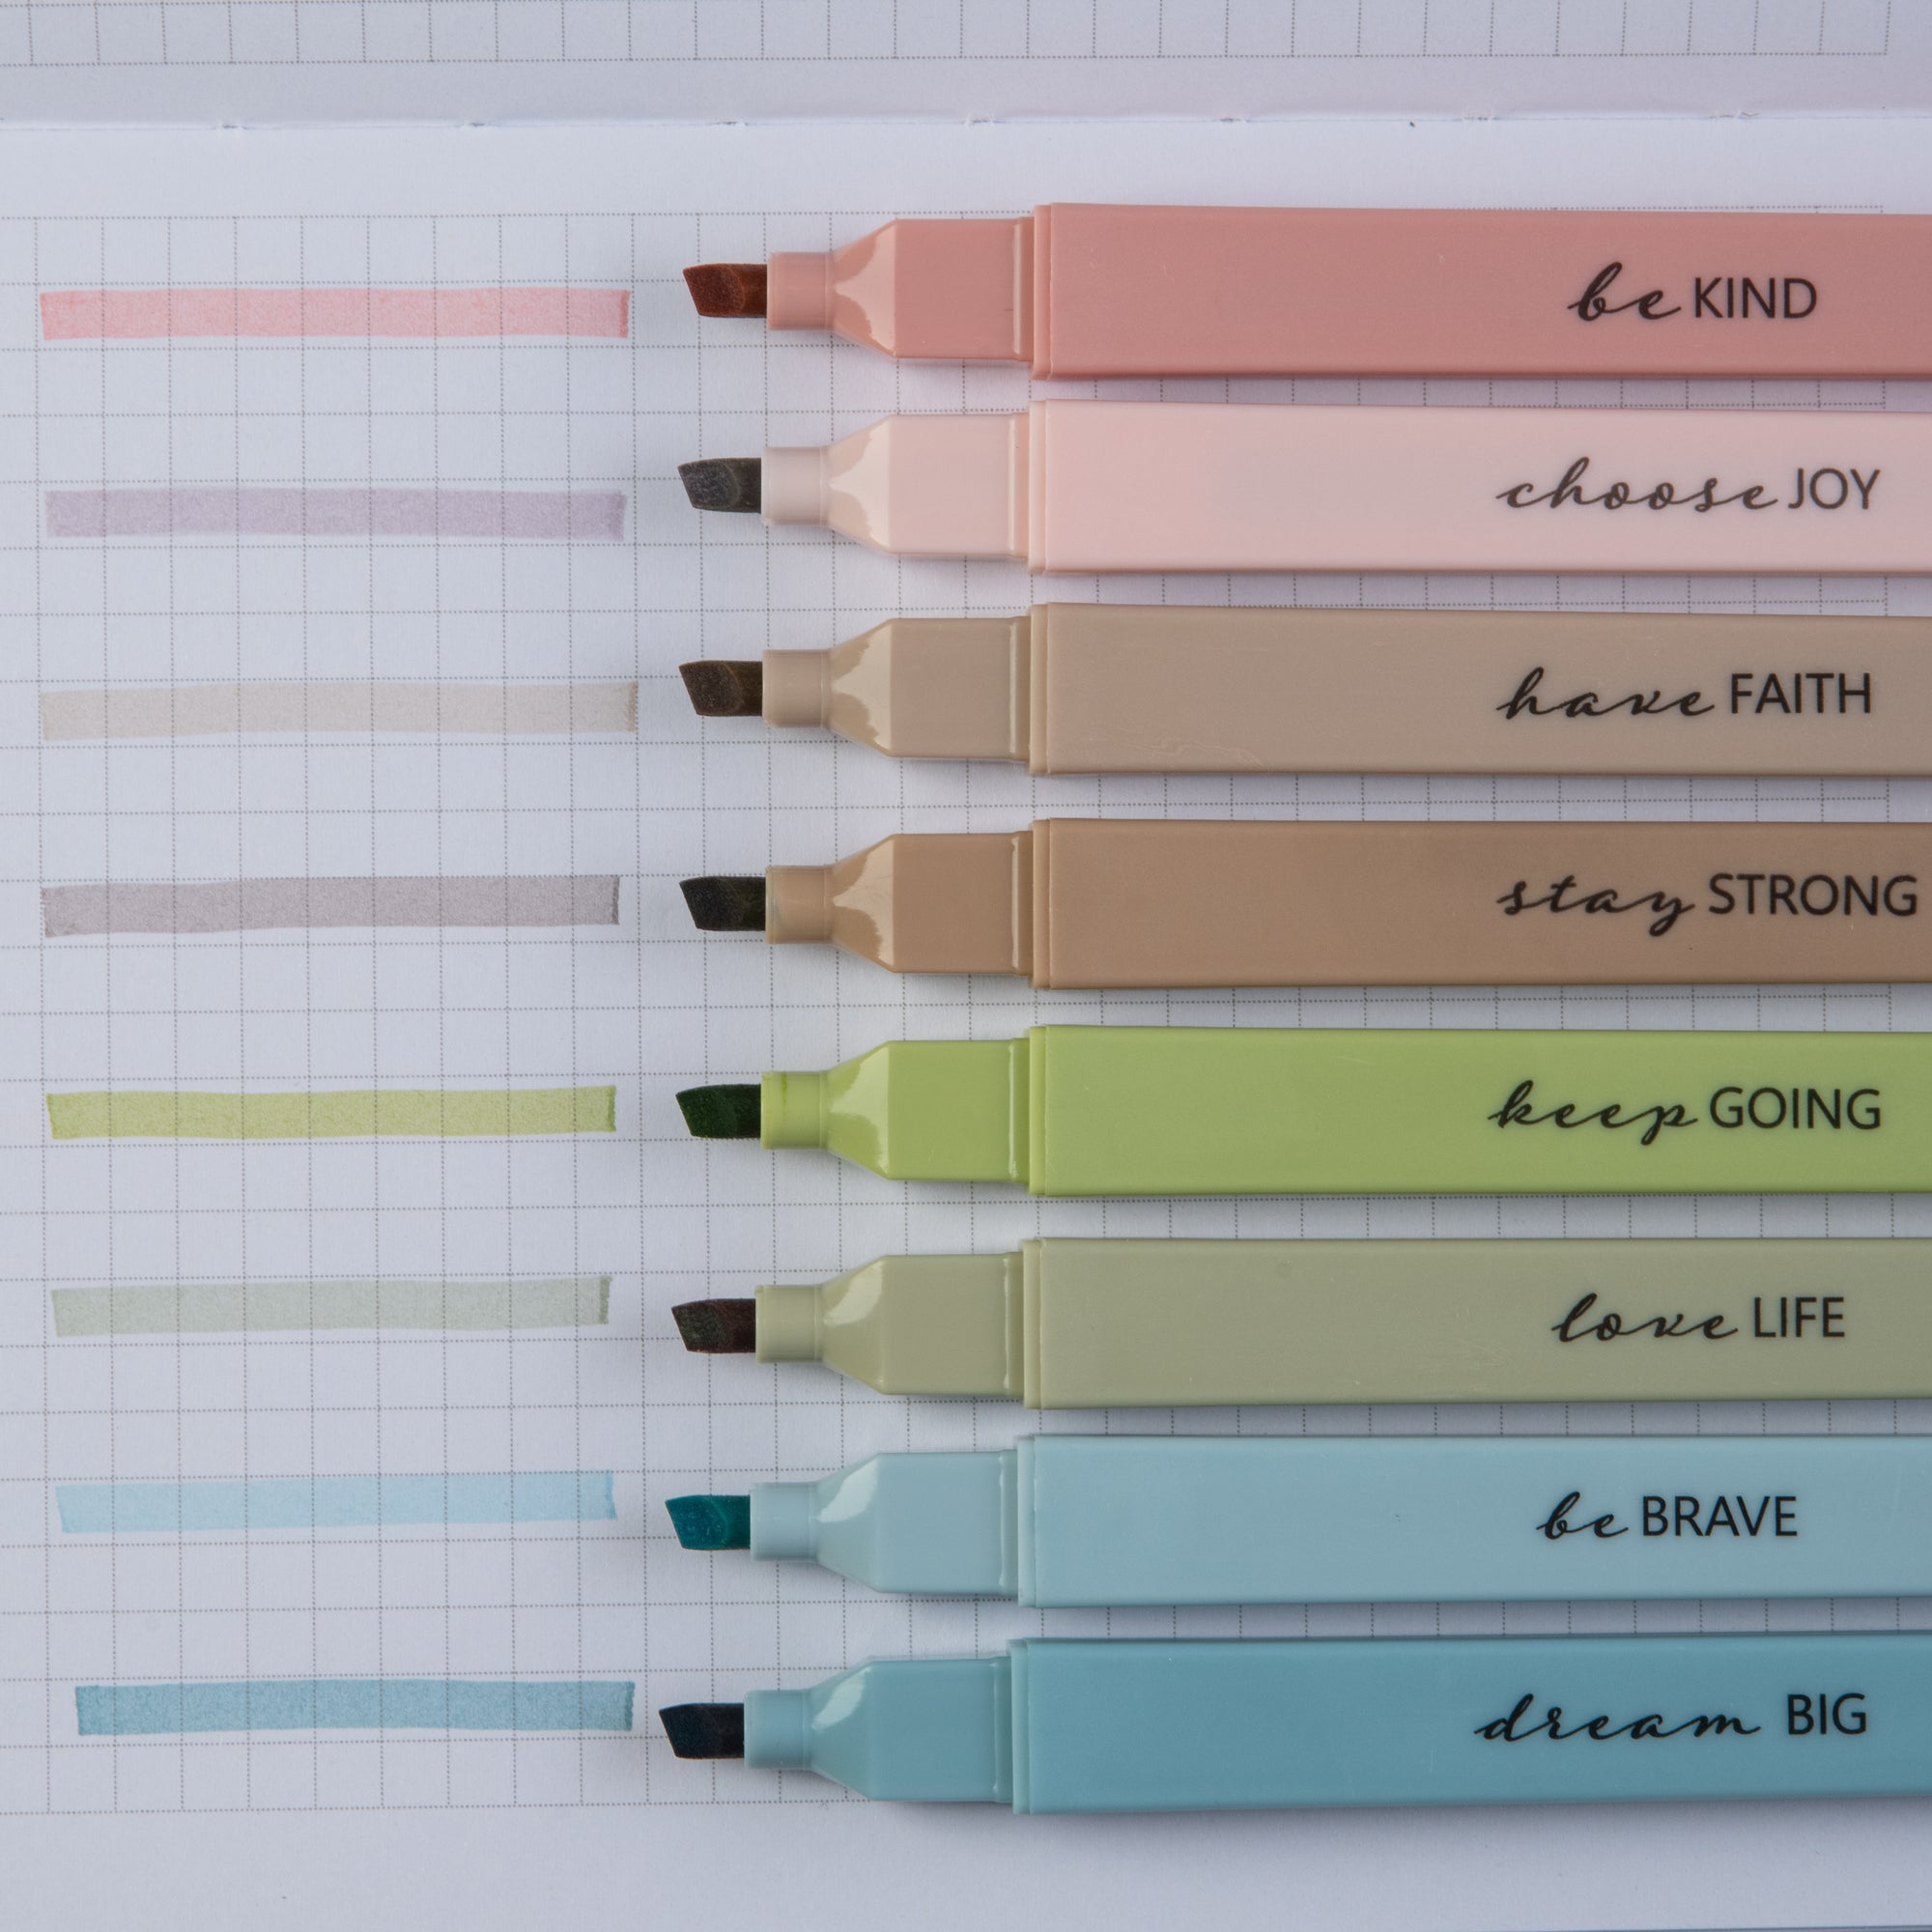 BLIEVE Aesthetic Highlighters and Gel Pens With Soft Ink and Tip, No Bleed  Dry Fast Easy to Hold, for Bible Journaling Planner Notes 